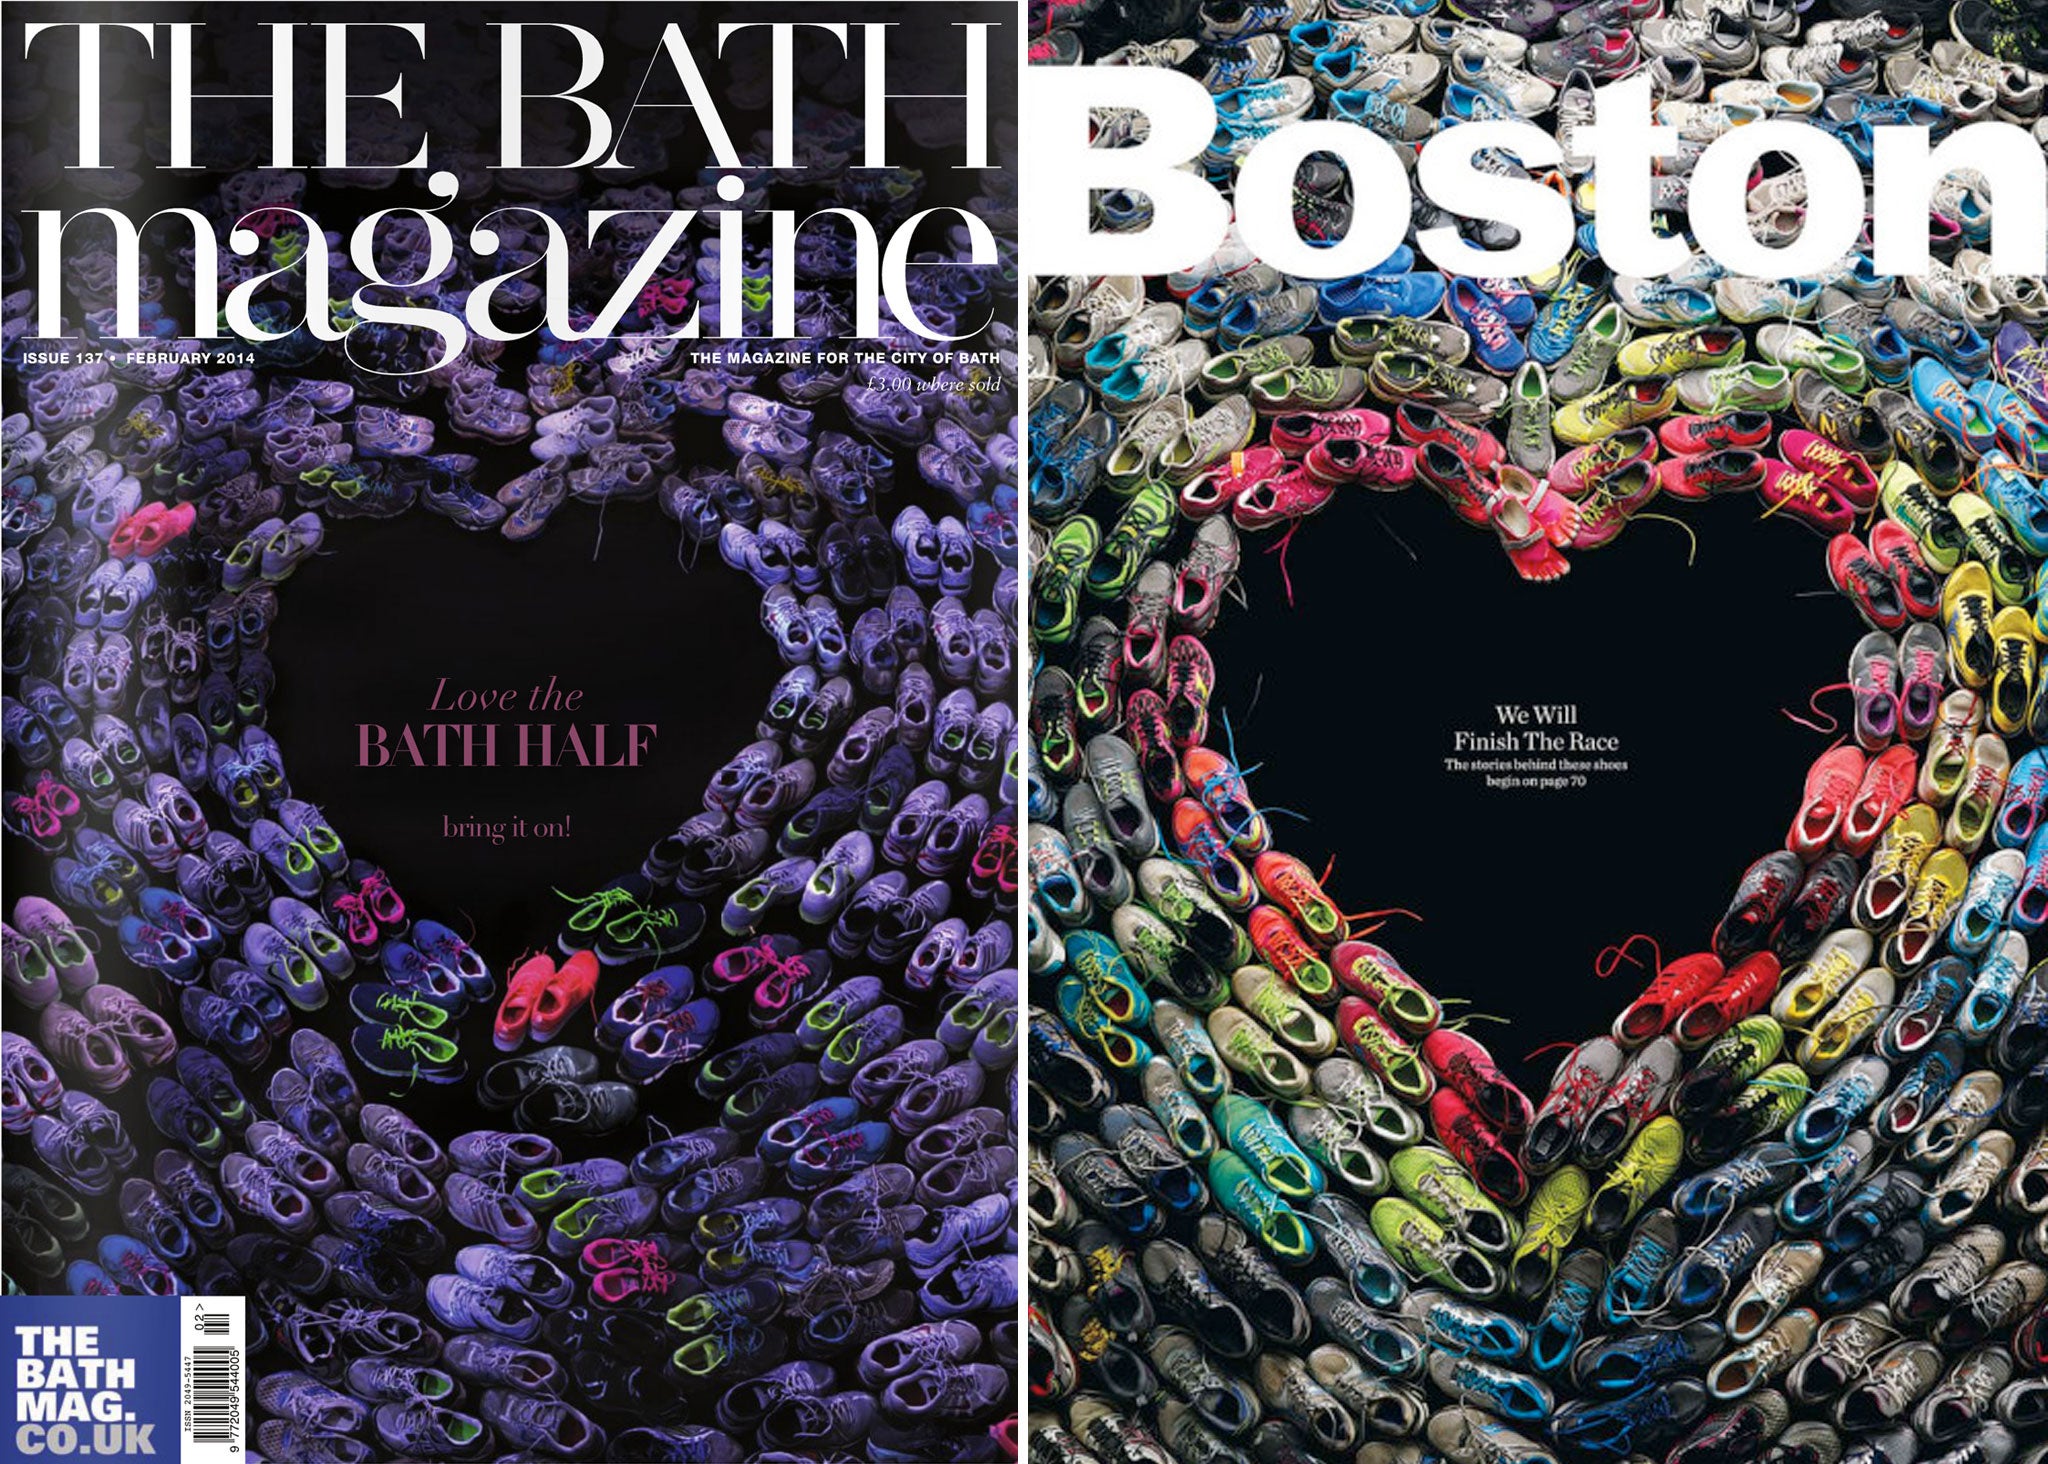 The Bath Magazine apologised after similarities between its cover and a Boston Marathon bombing victims tribute image caused outrage on social media